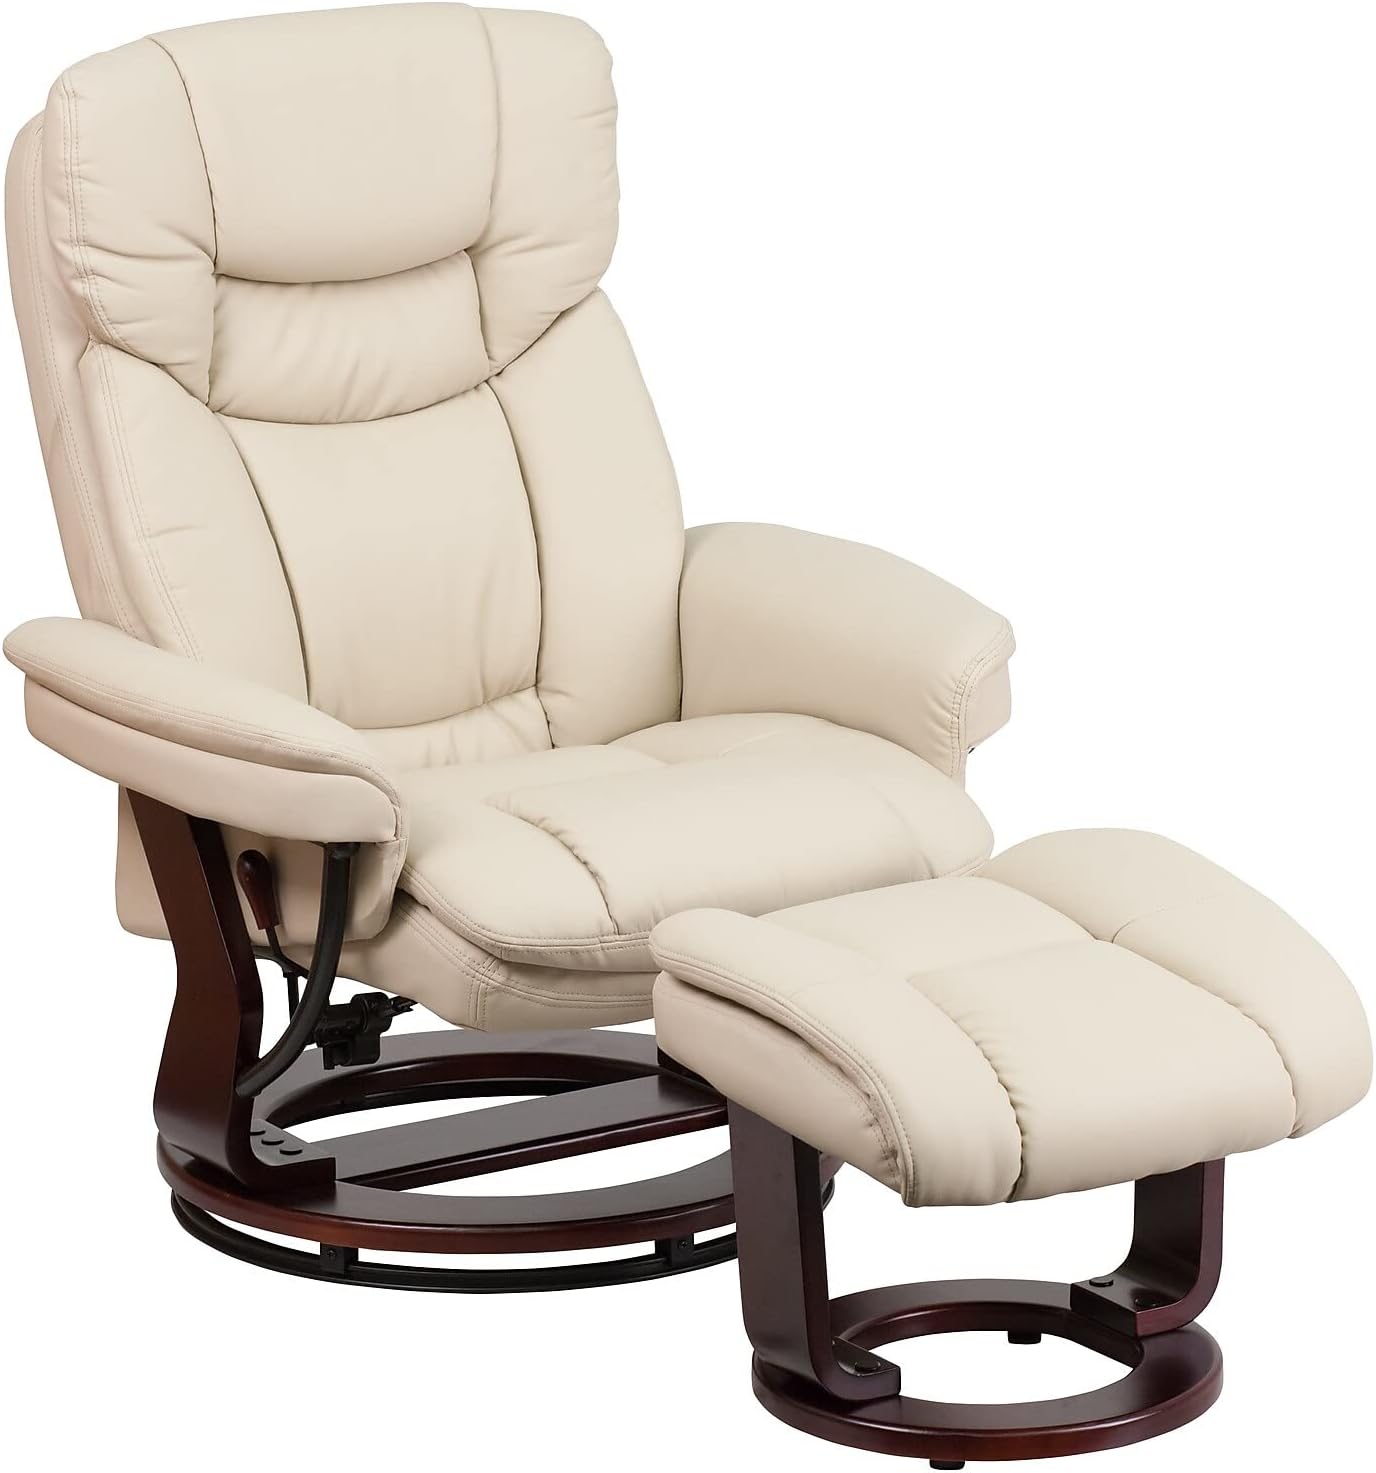 stressless chair detailed review